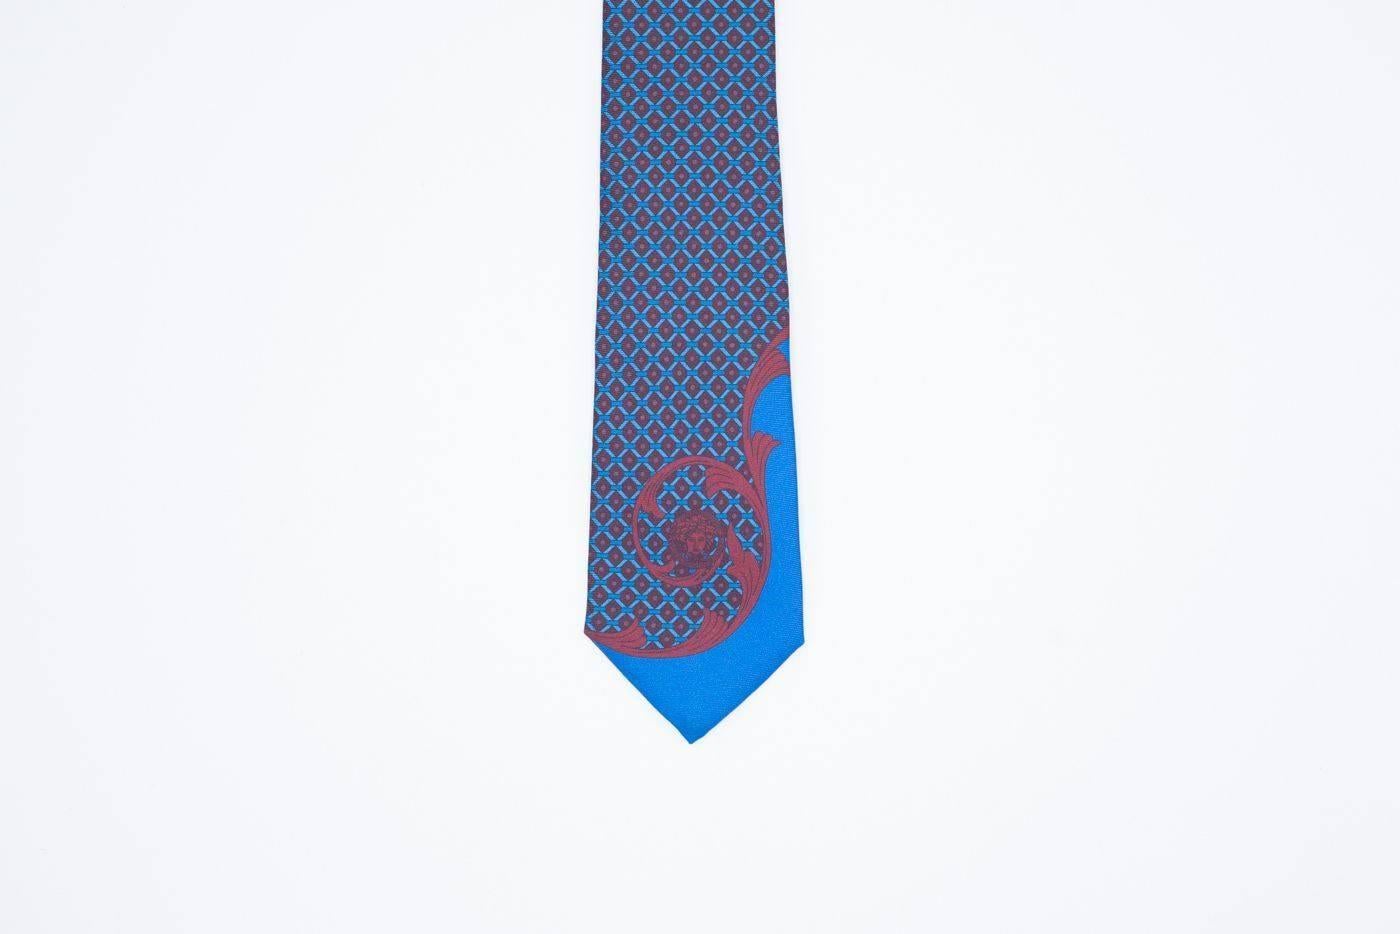 Brand New Versace Men's Silk Tie 
Retail In Stores & Online for $175
One Size Fits All

Blue and red printed geometric Versace tie. Match in style with any colored suit or button down. Made with 100% Silk, the tie is ultra soft to the touch.

Silk